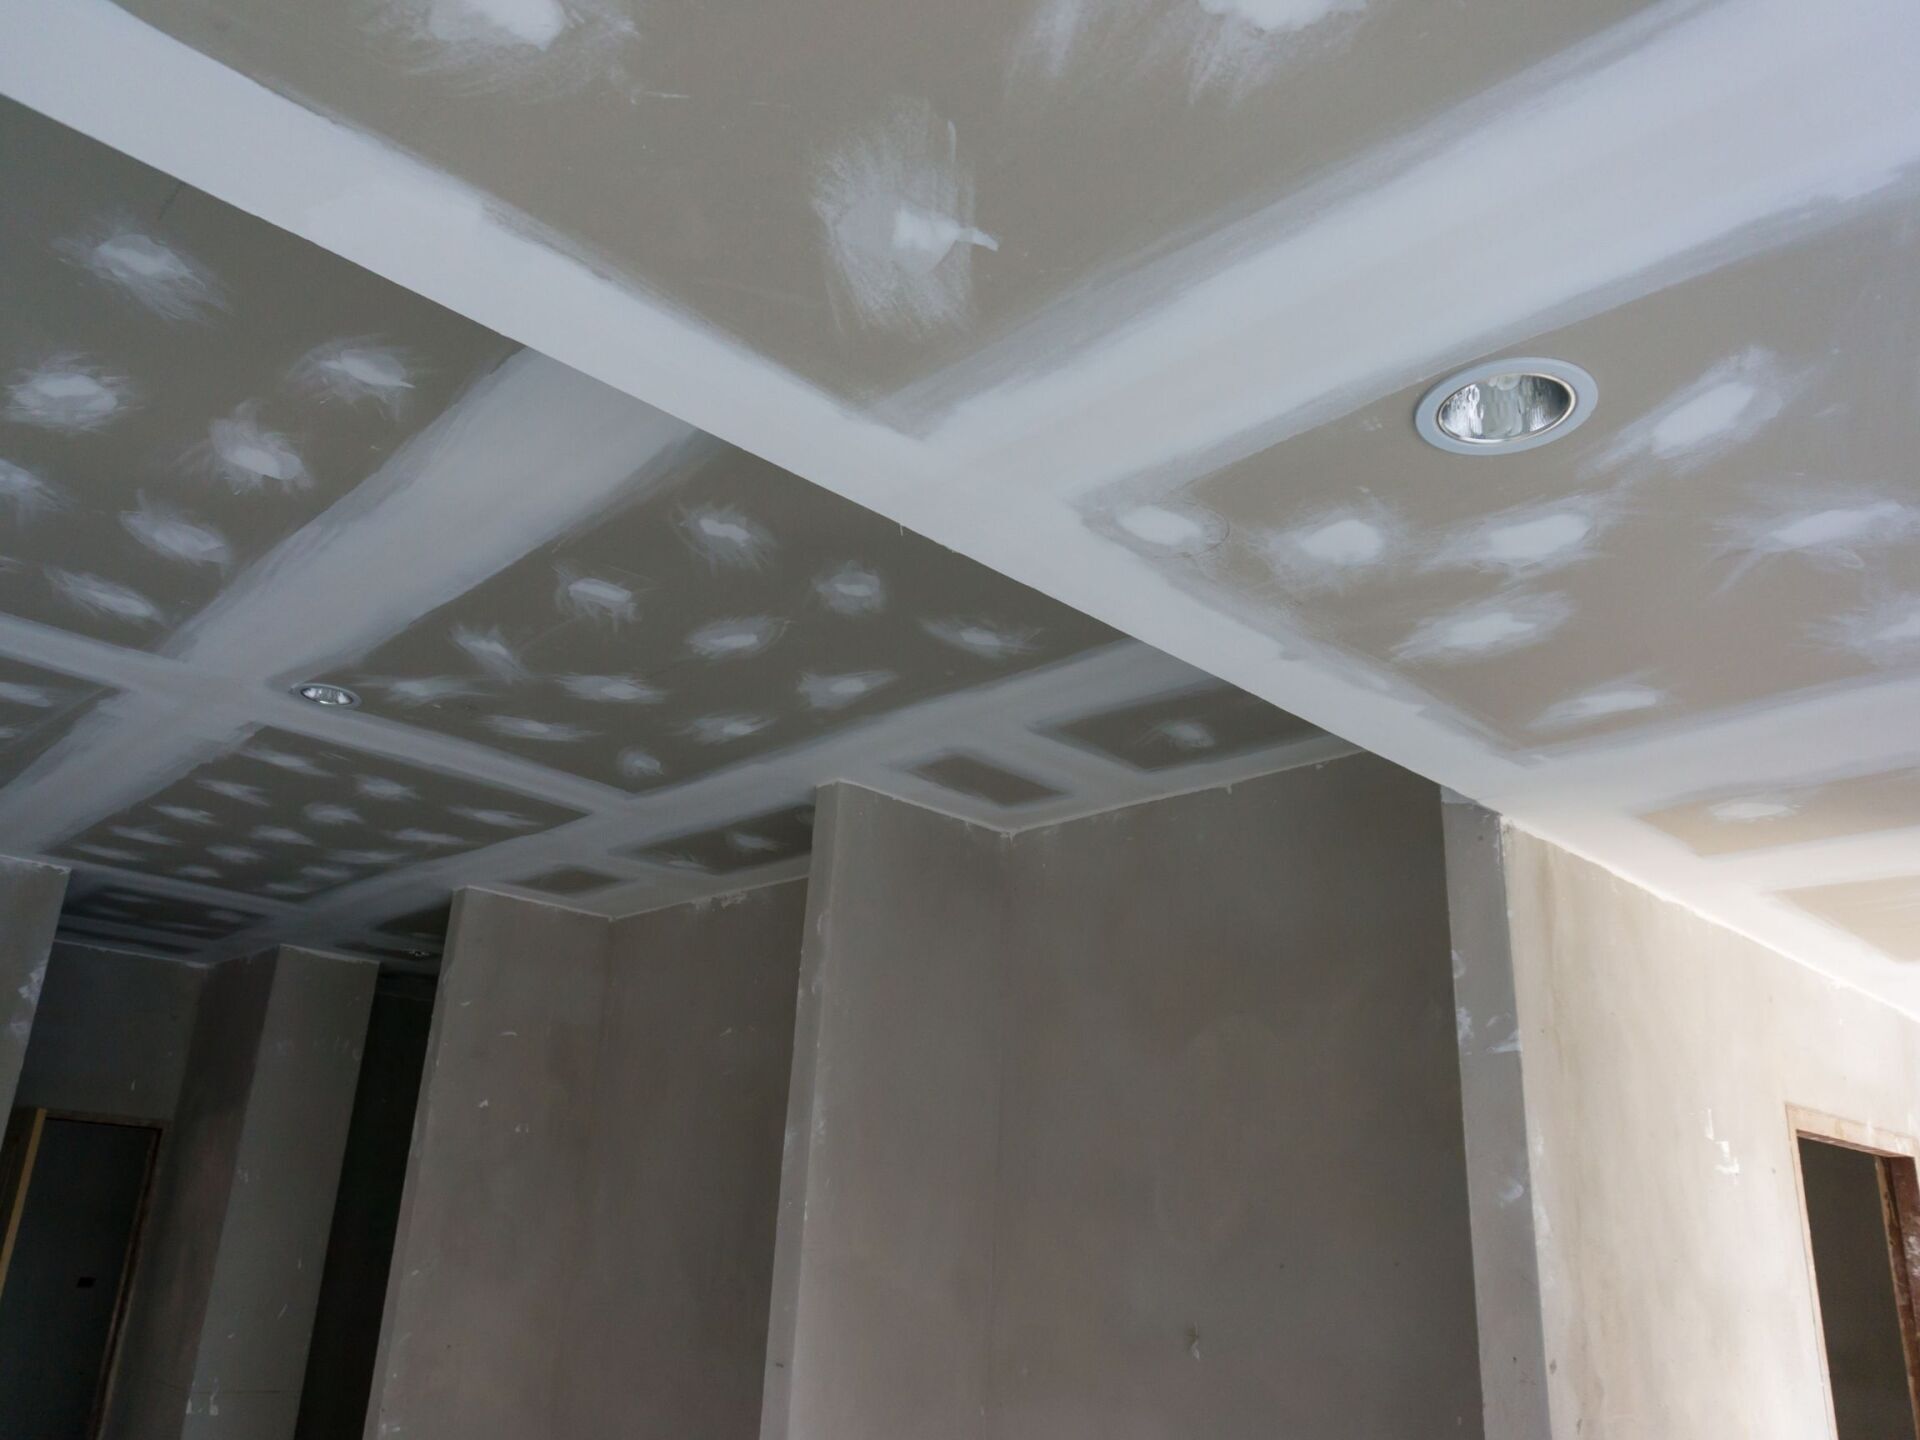 drywall and tape on a new ceiling